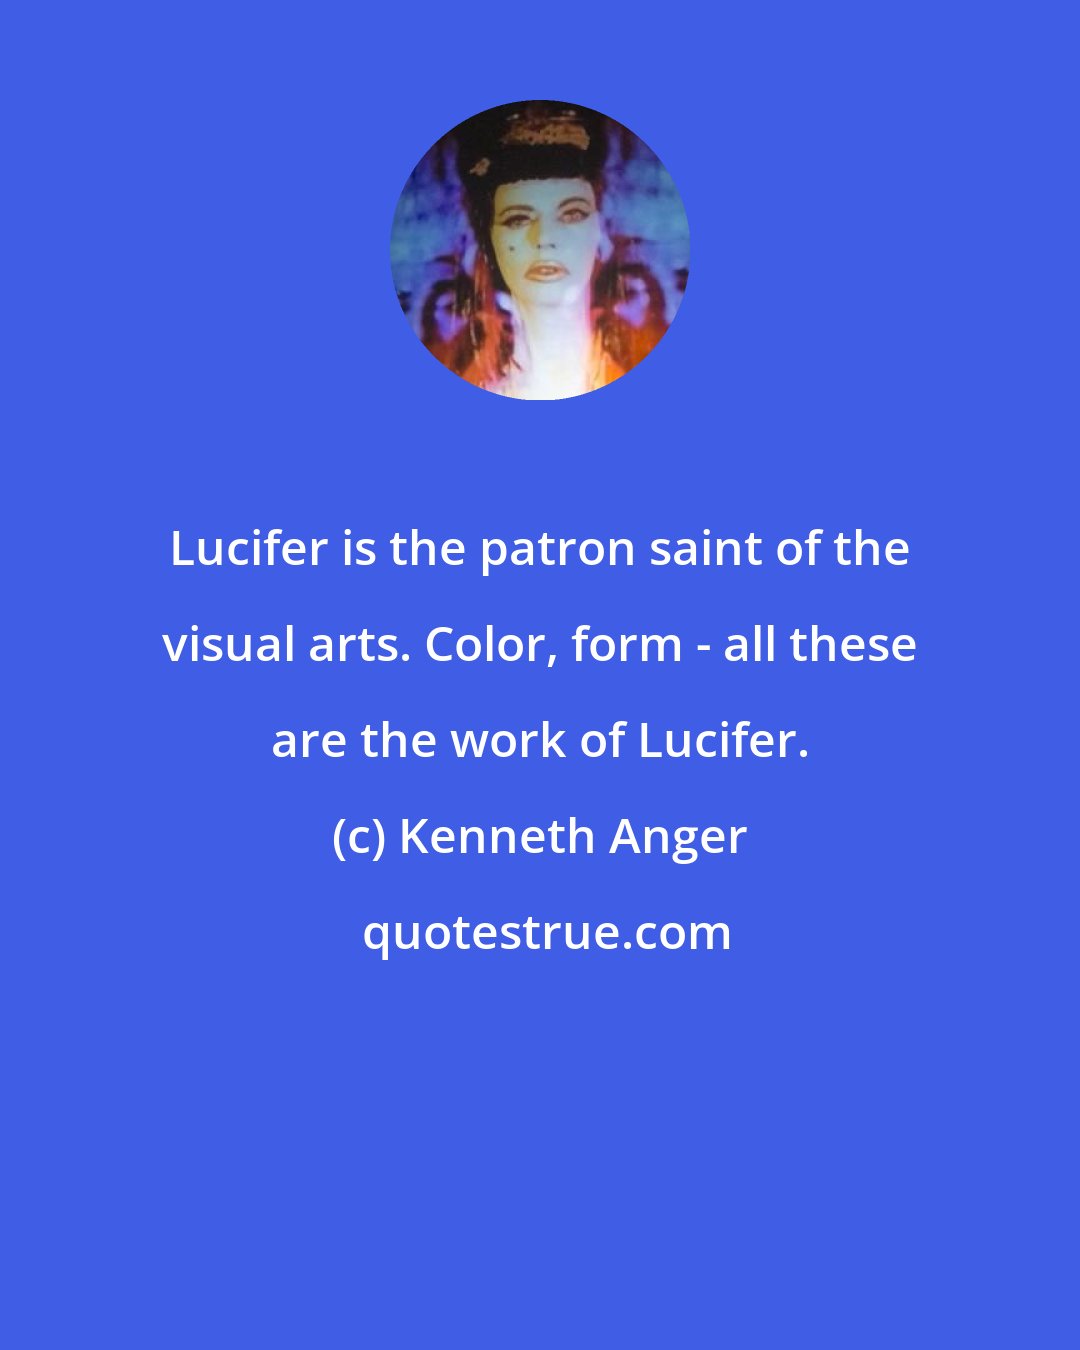 Kenneth Anger: Lucifer is the patron saint of the visual arts. Color, form - all these are the work of Lucifer.